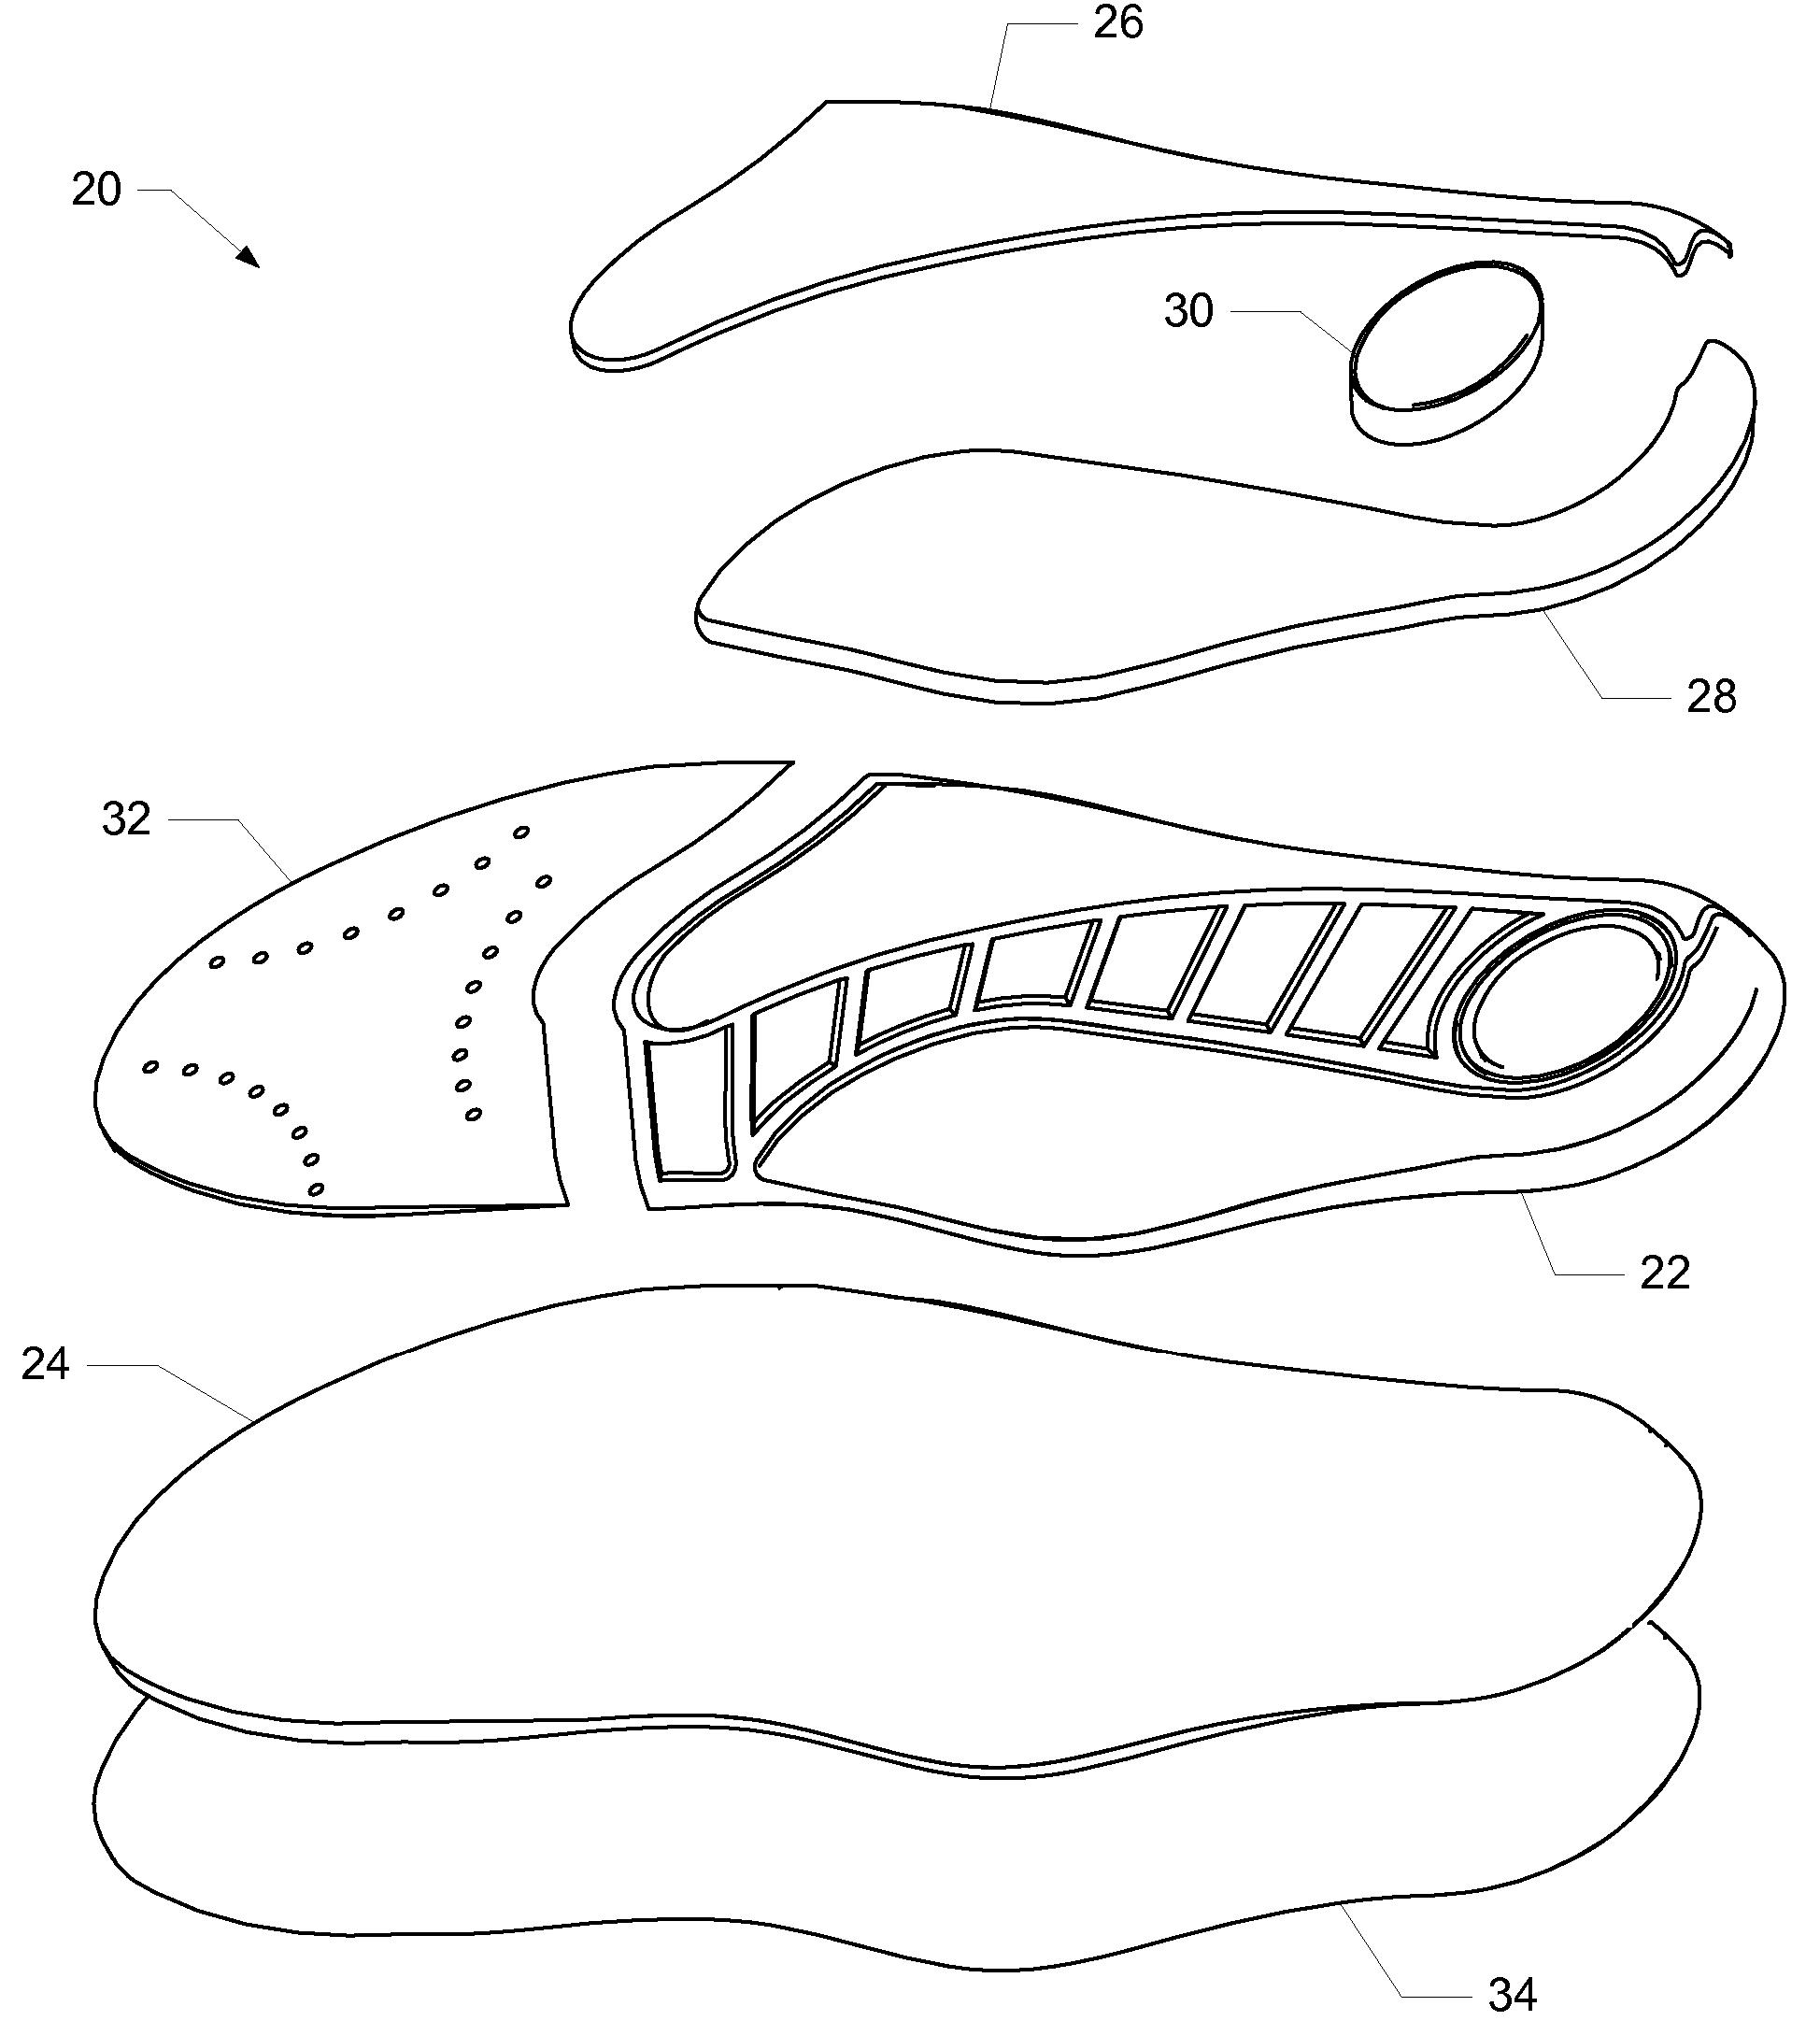 Shoe insole with improved support and motion control